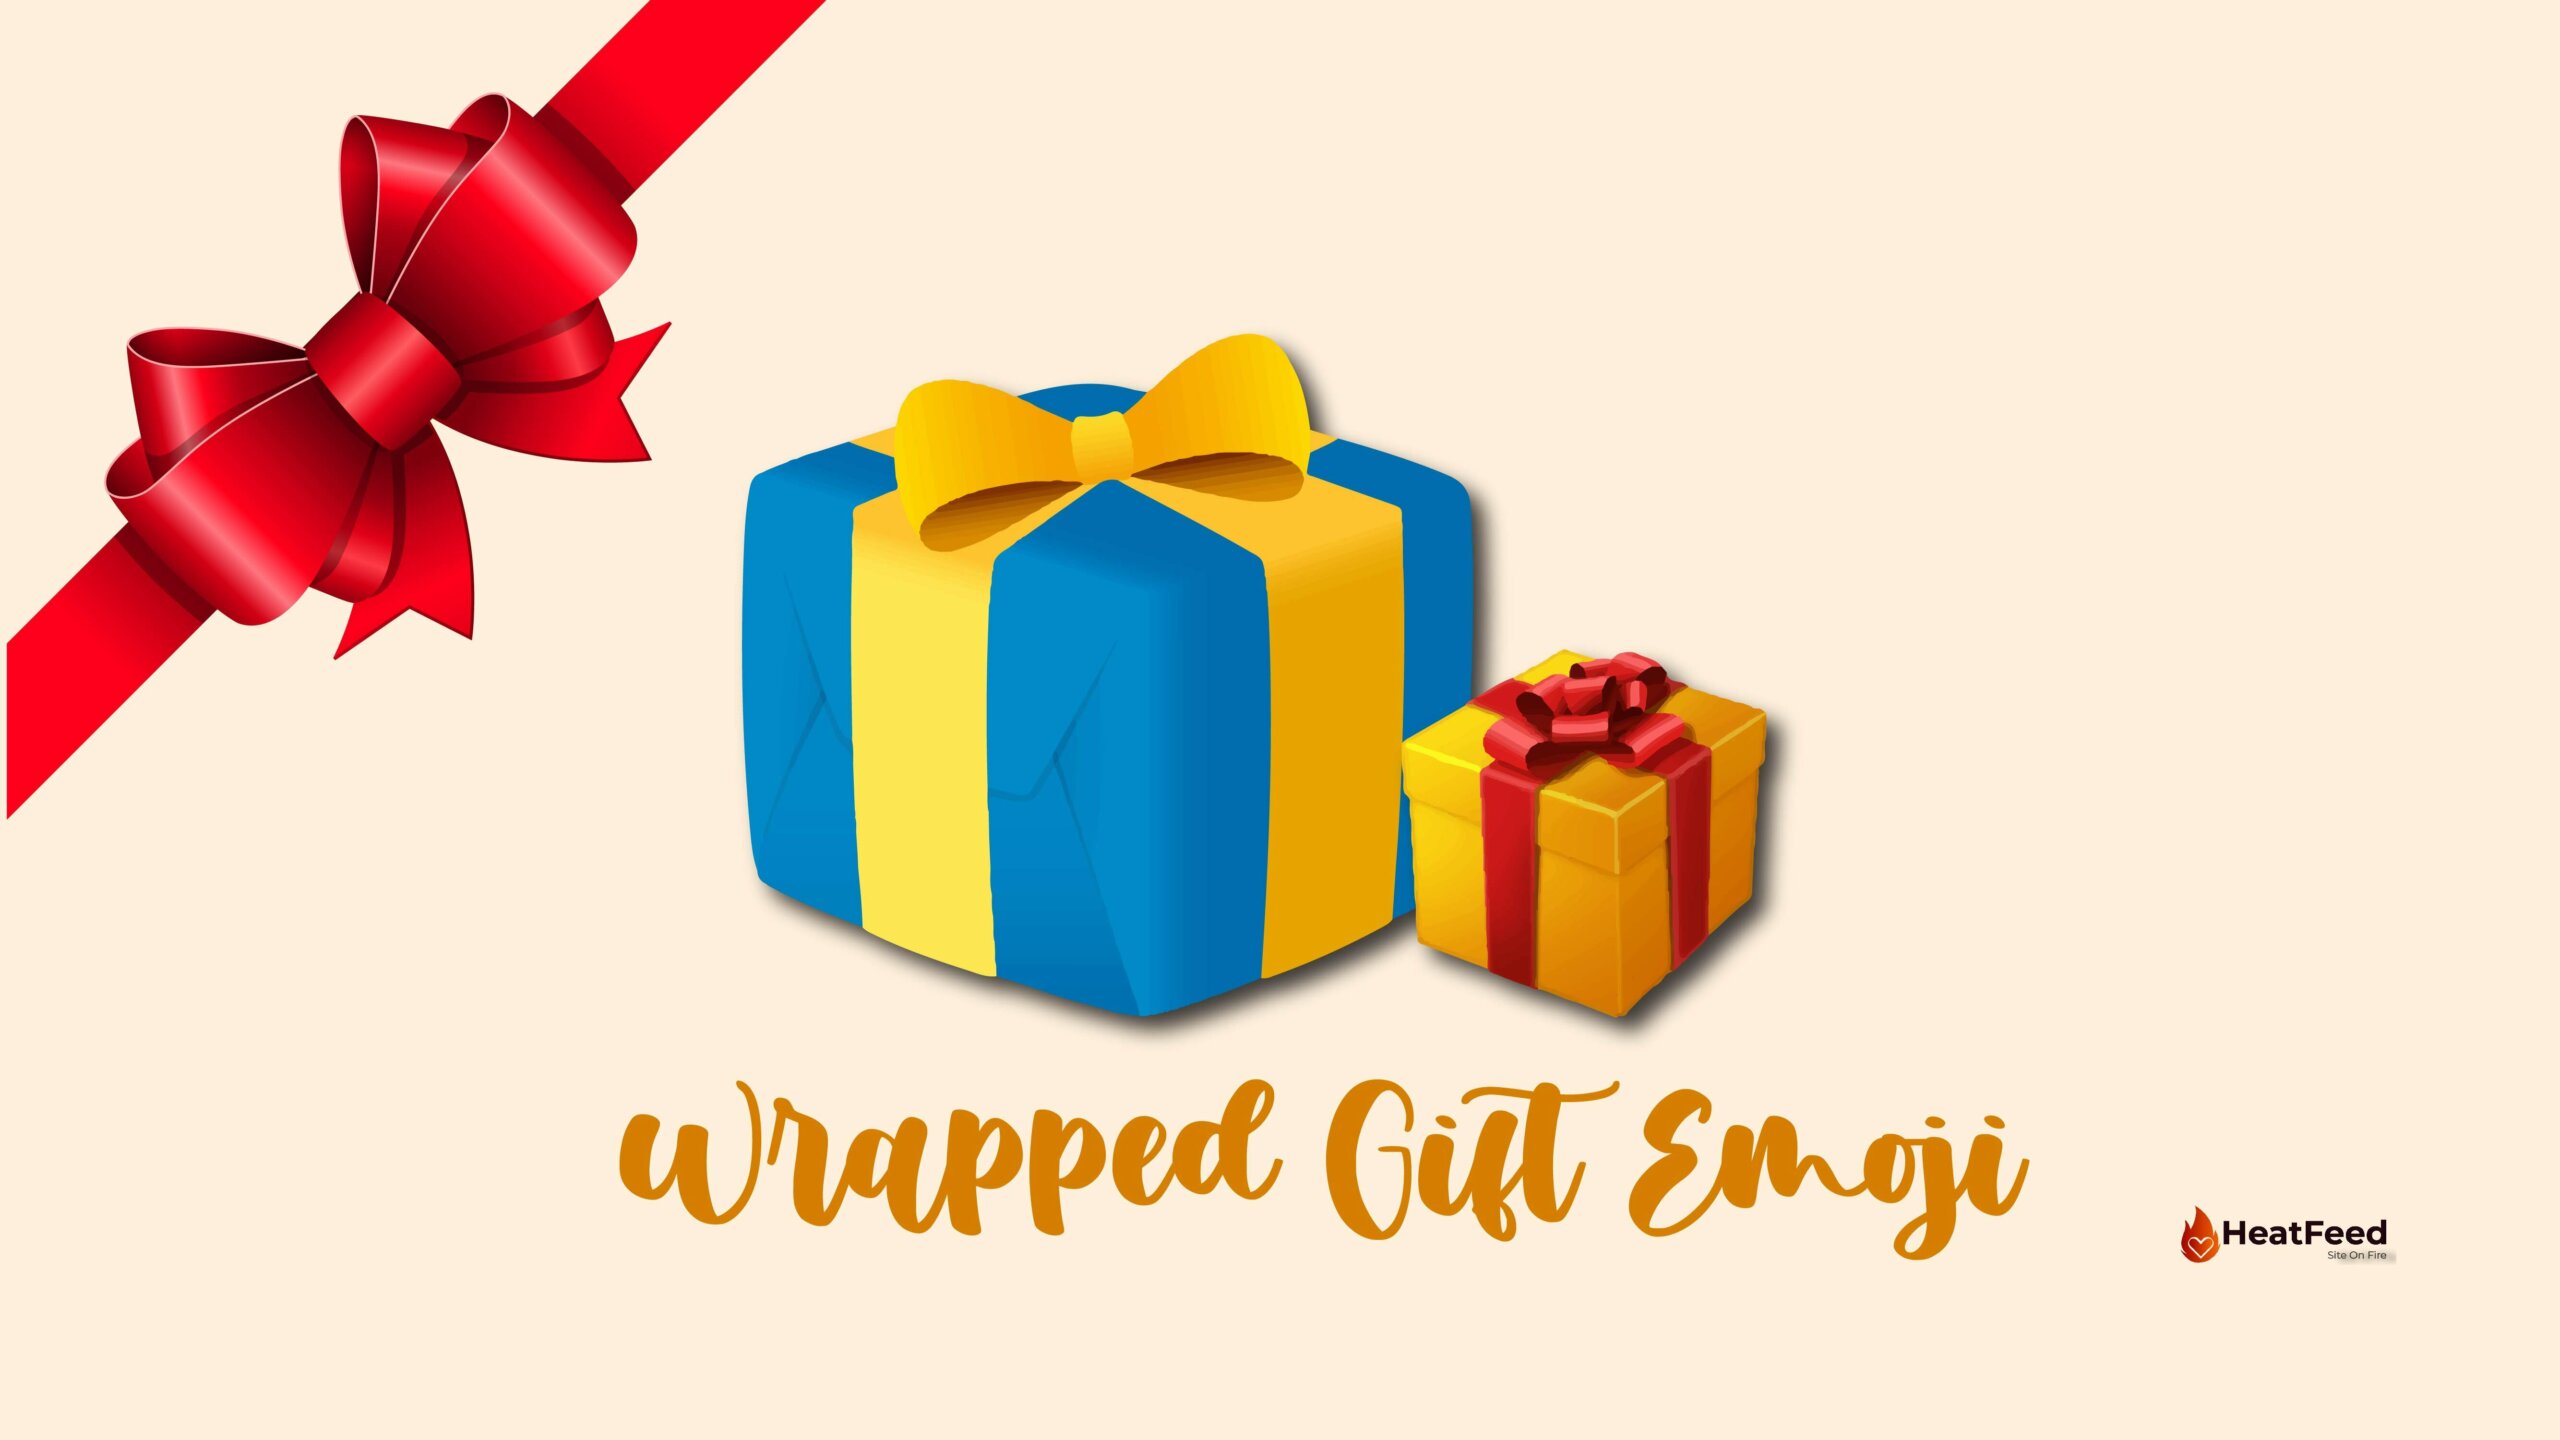 Wrapped Gift Emoji Meaning Copy Paste